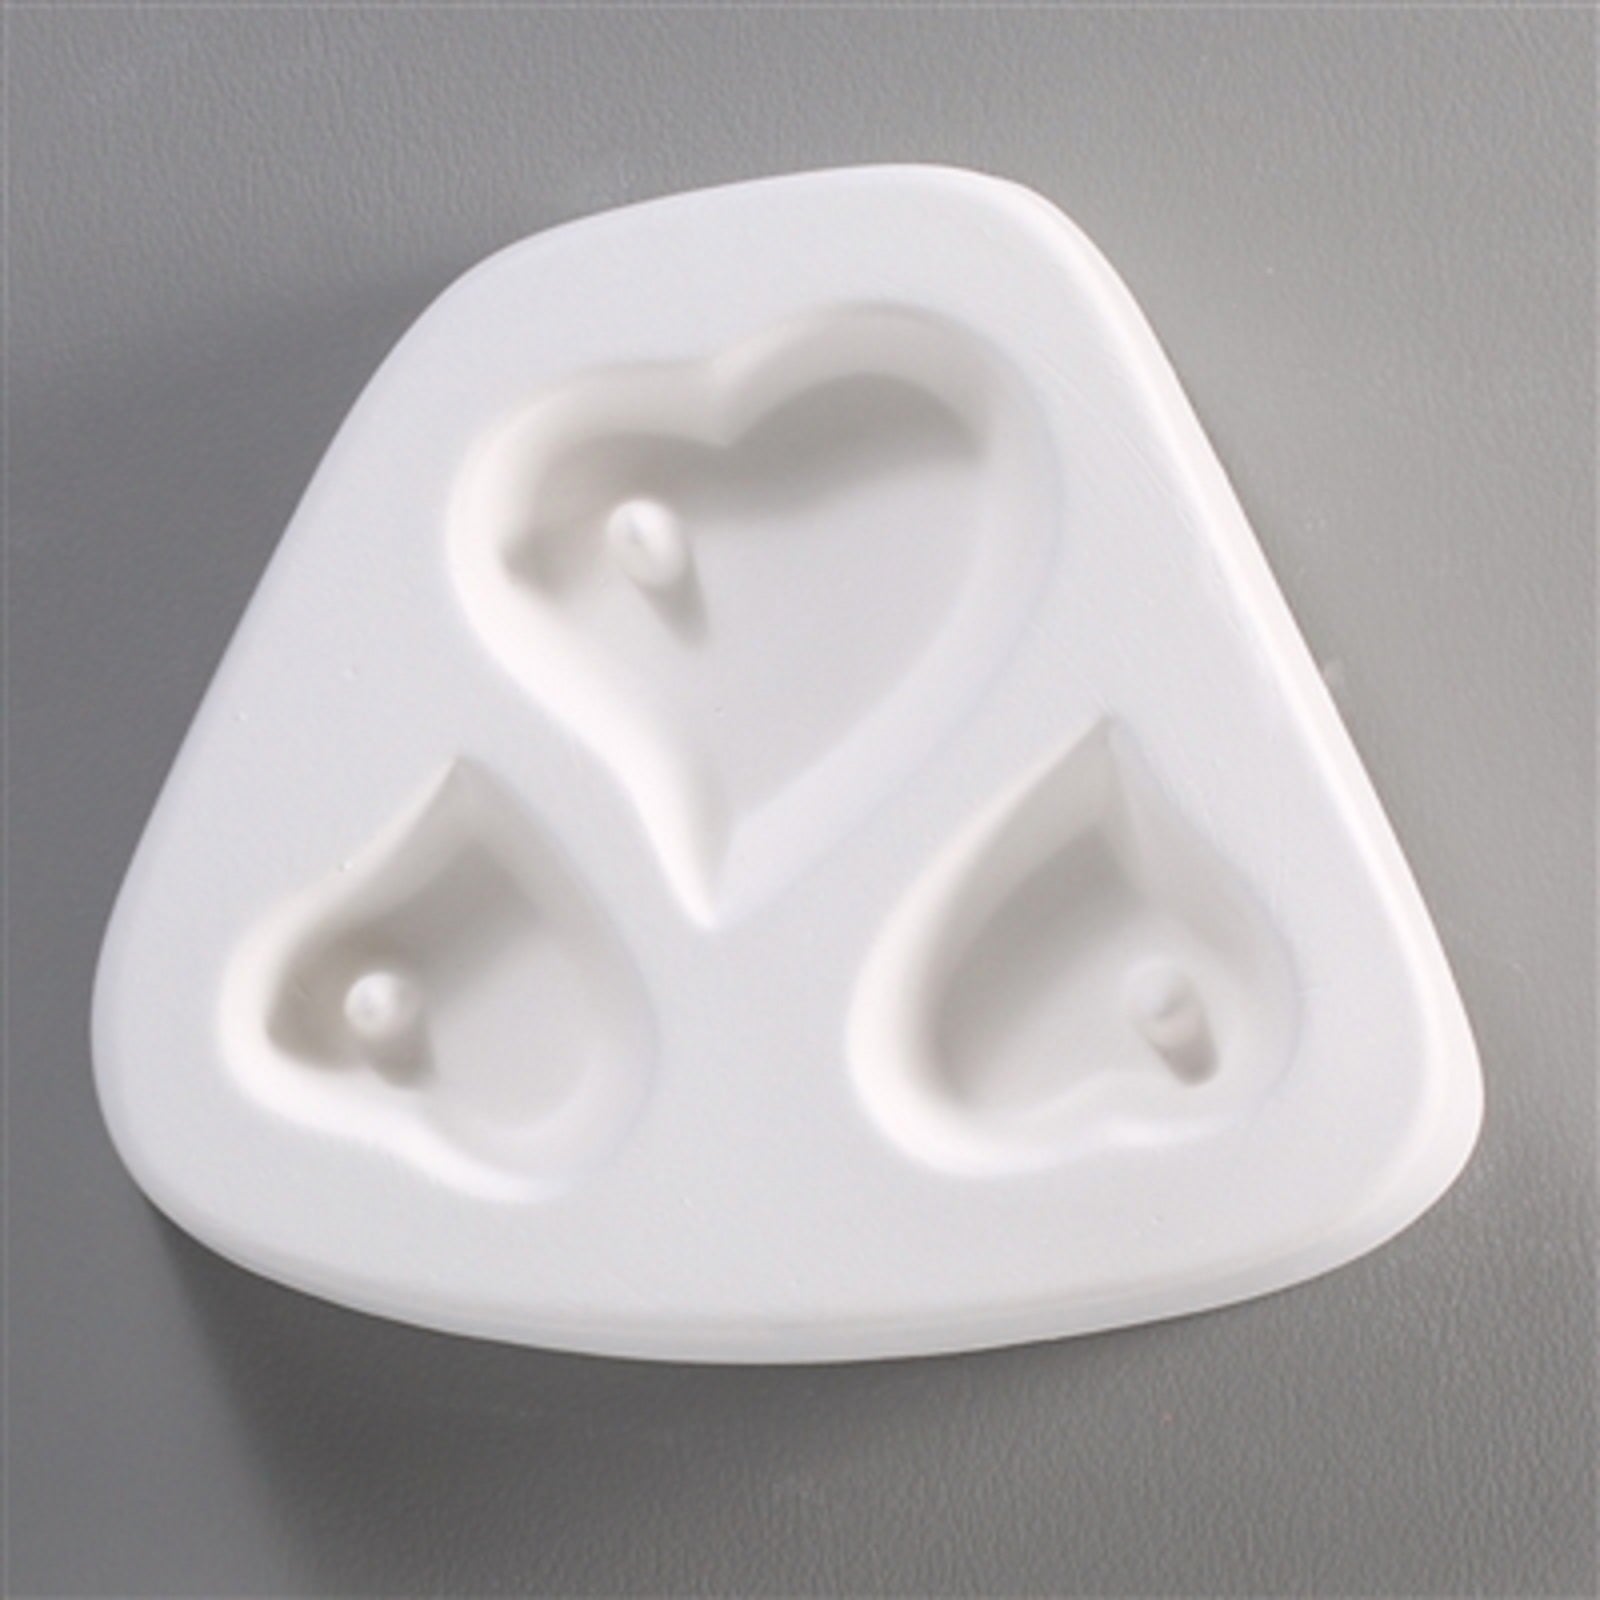 LF73 - Holey Heart Trio Jewelry Casting Mold for Glass Fusing